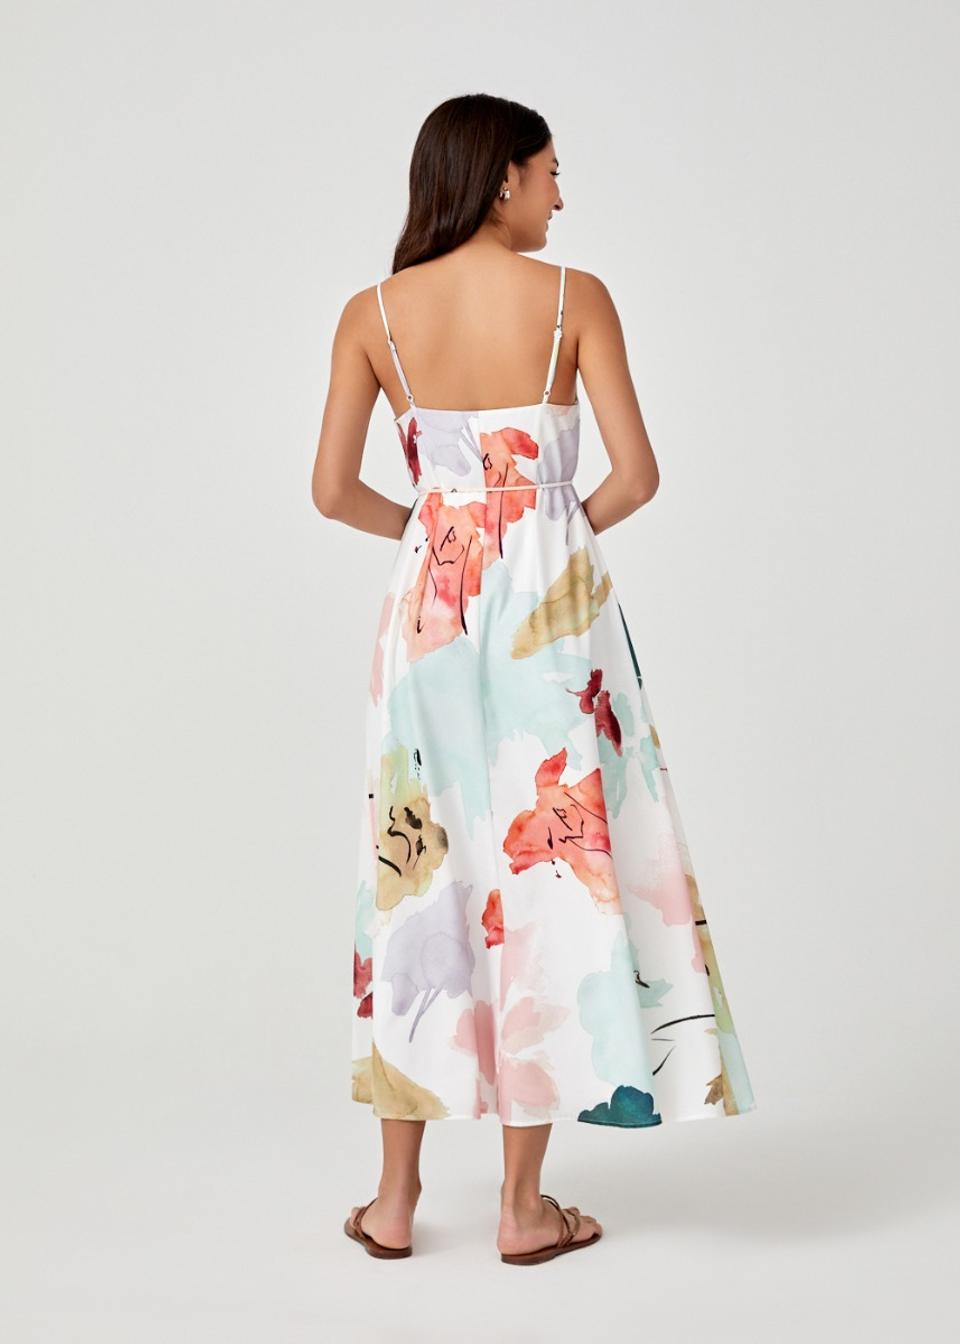 Desiree Strappy Maxi Dress in Floral Dance